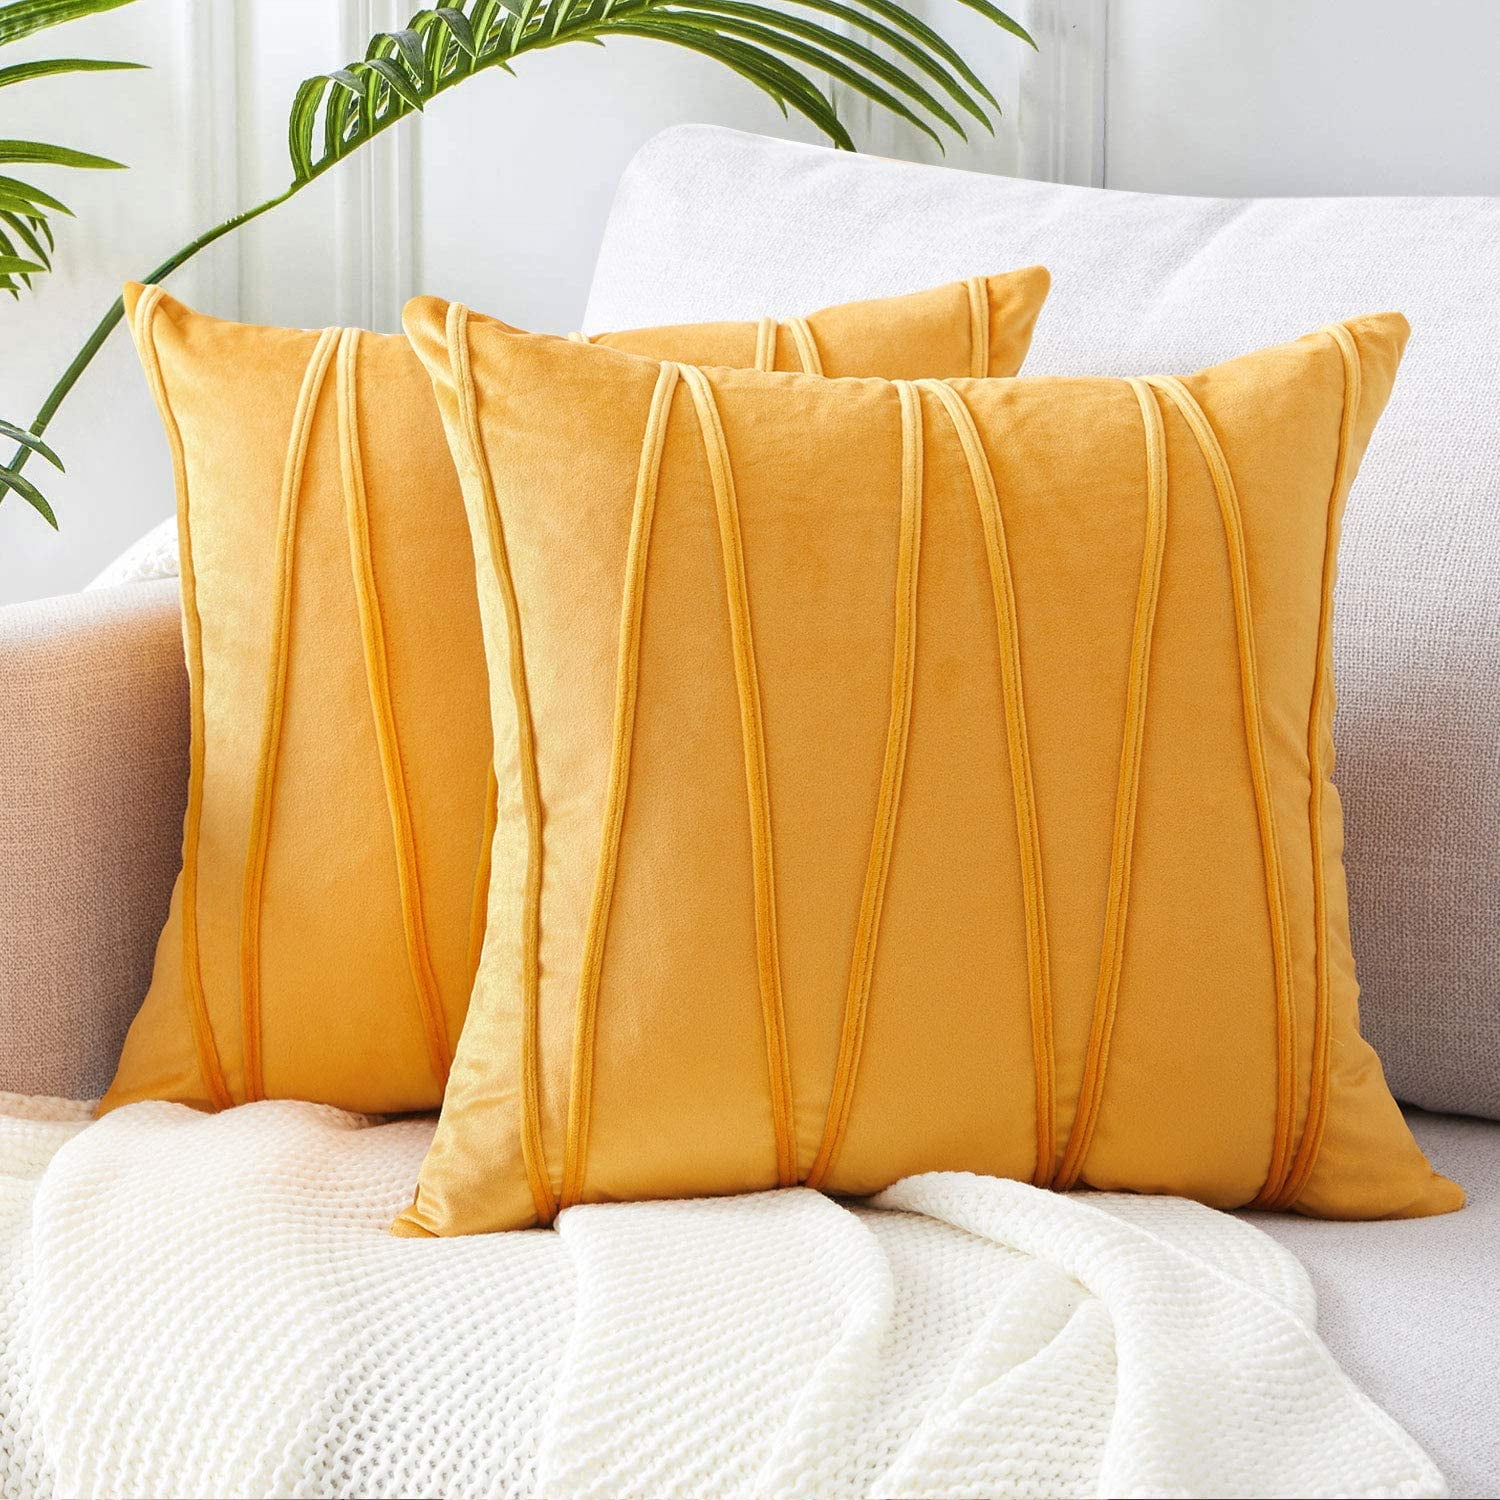 Topfinel Decorative HandMade Throw Pillow Covers Soft Particles Velvet Solid Cushion Covers 18